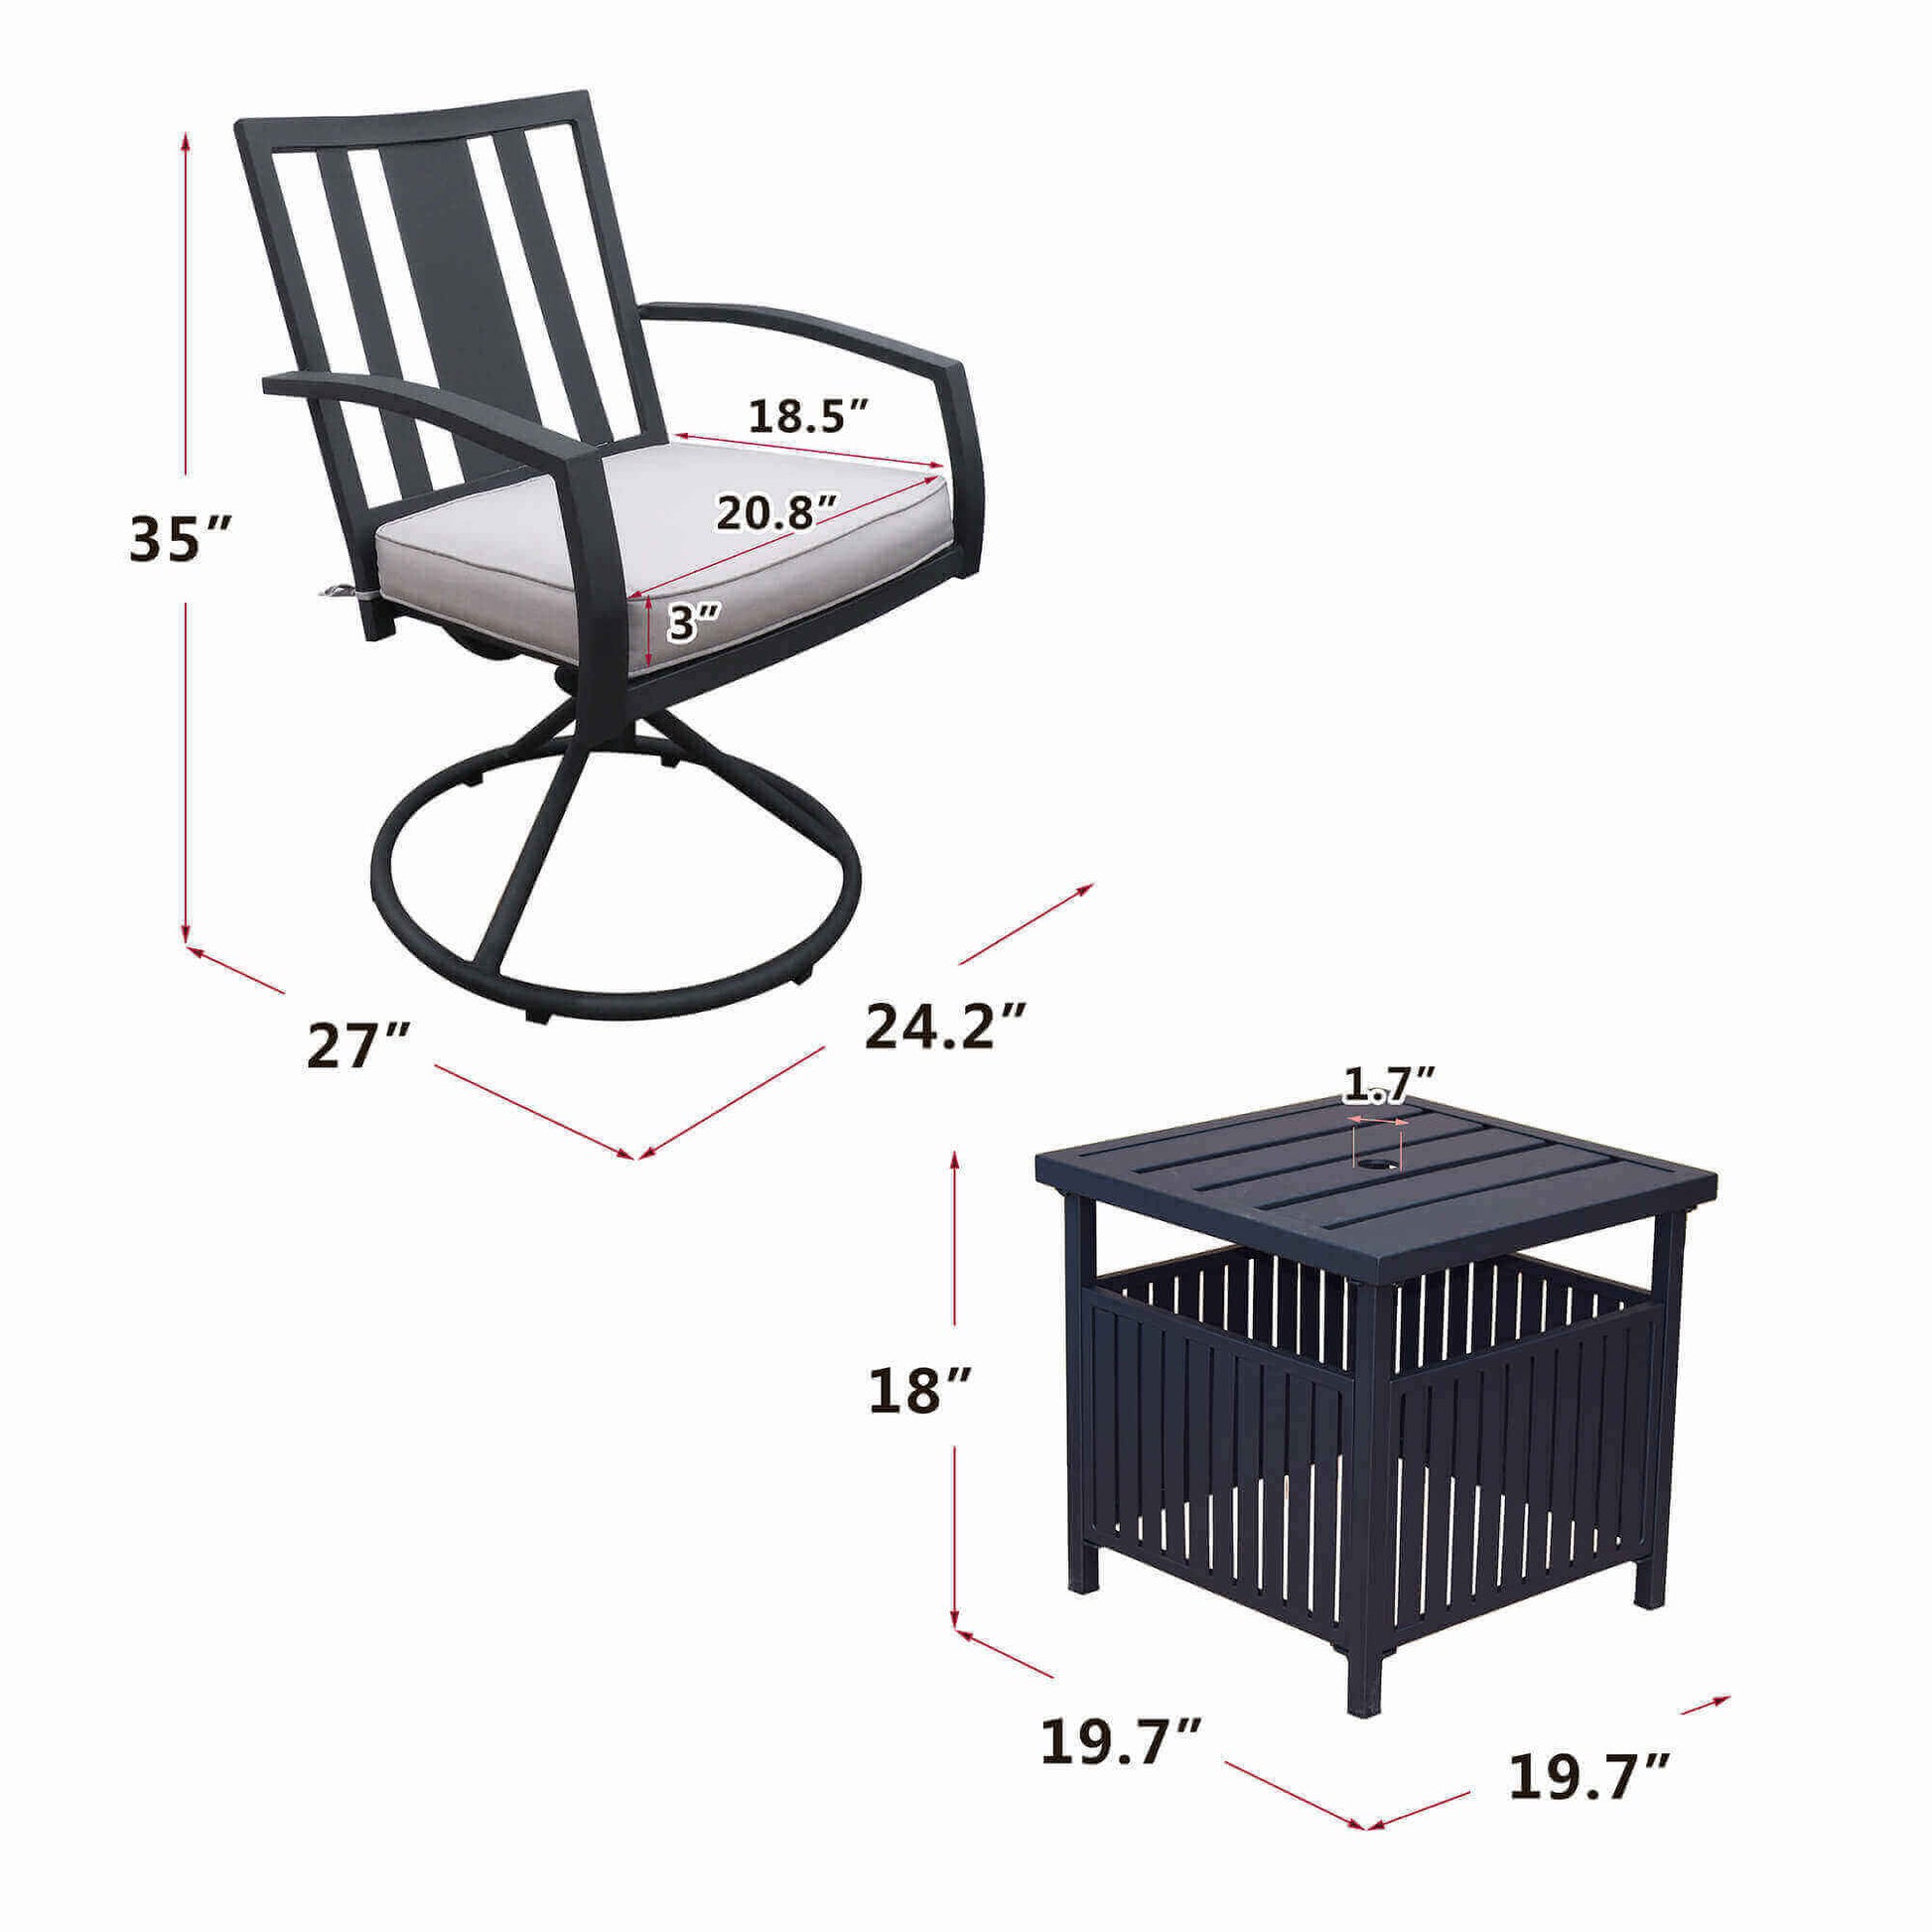 Outdoor Patio Swivel Rocker Chairs with Cushion/Patio 360-Degree Swivel Metal Frame Dining Chairs Set of 3 with Coffee Table